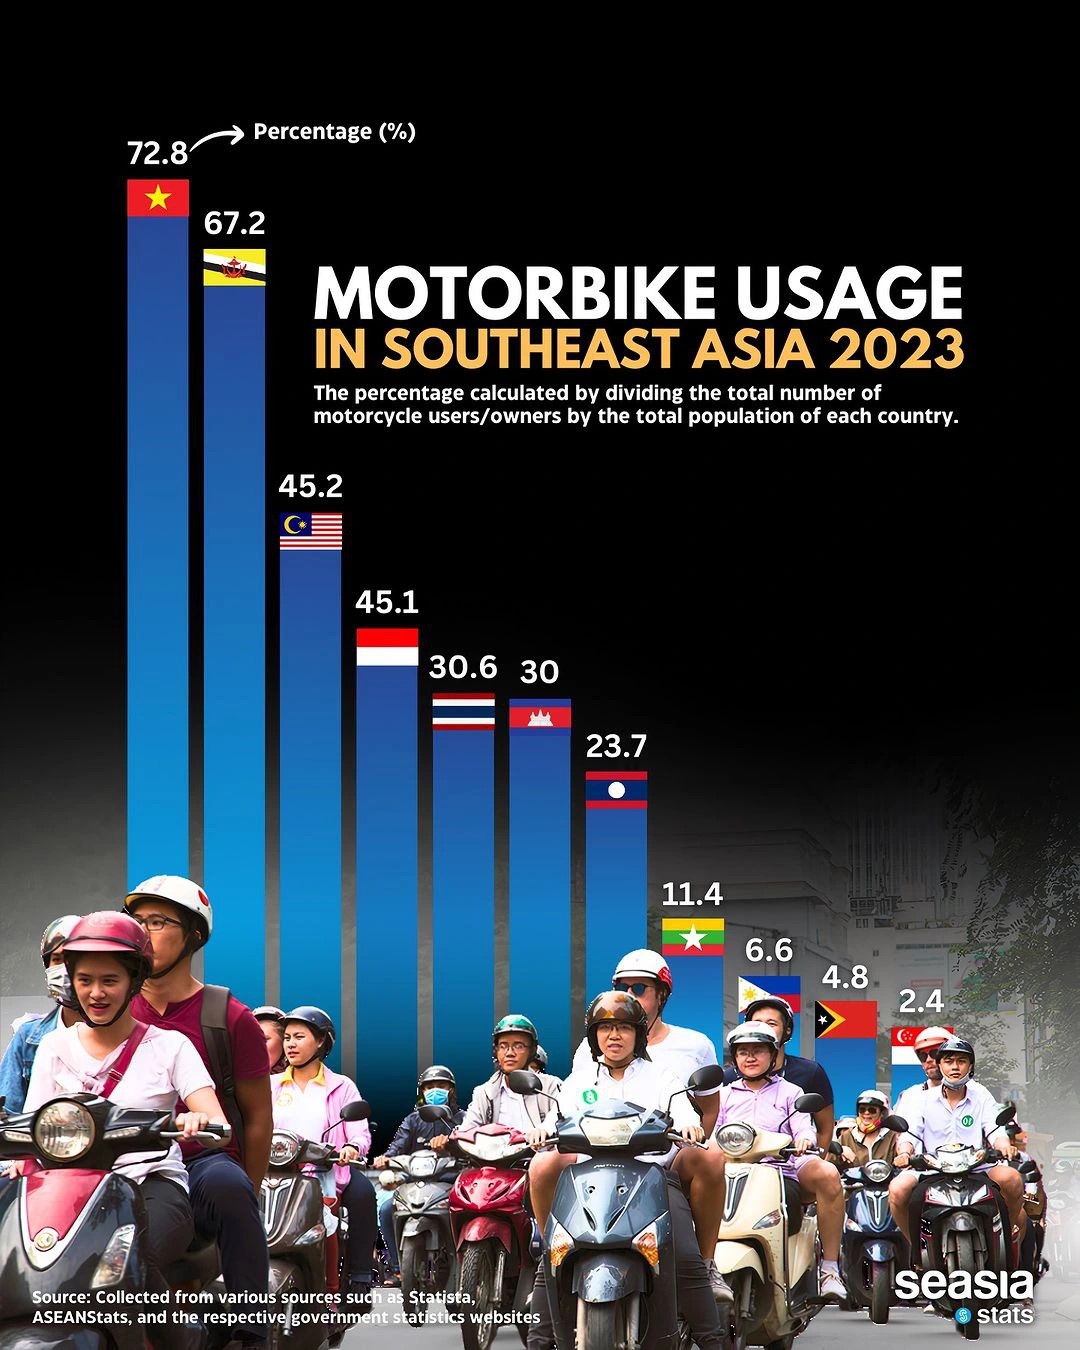 Statistics on motorbike usage rates in Southeast Asian countries according to Seasia's survey